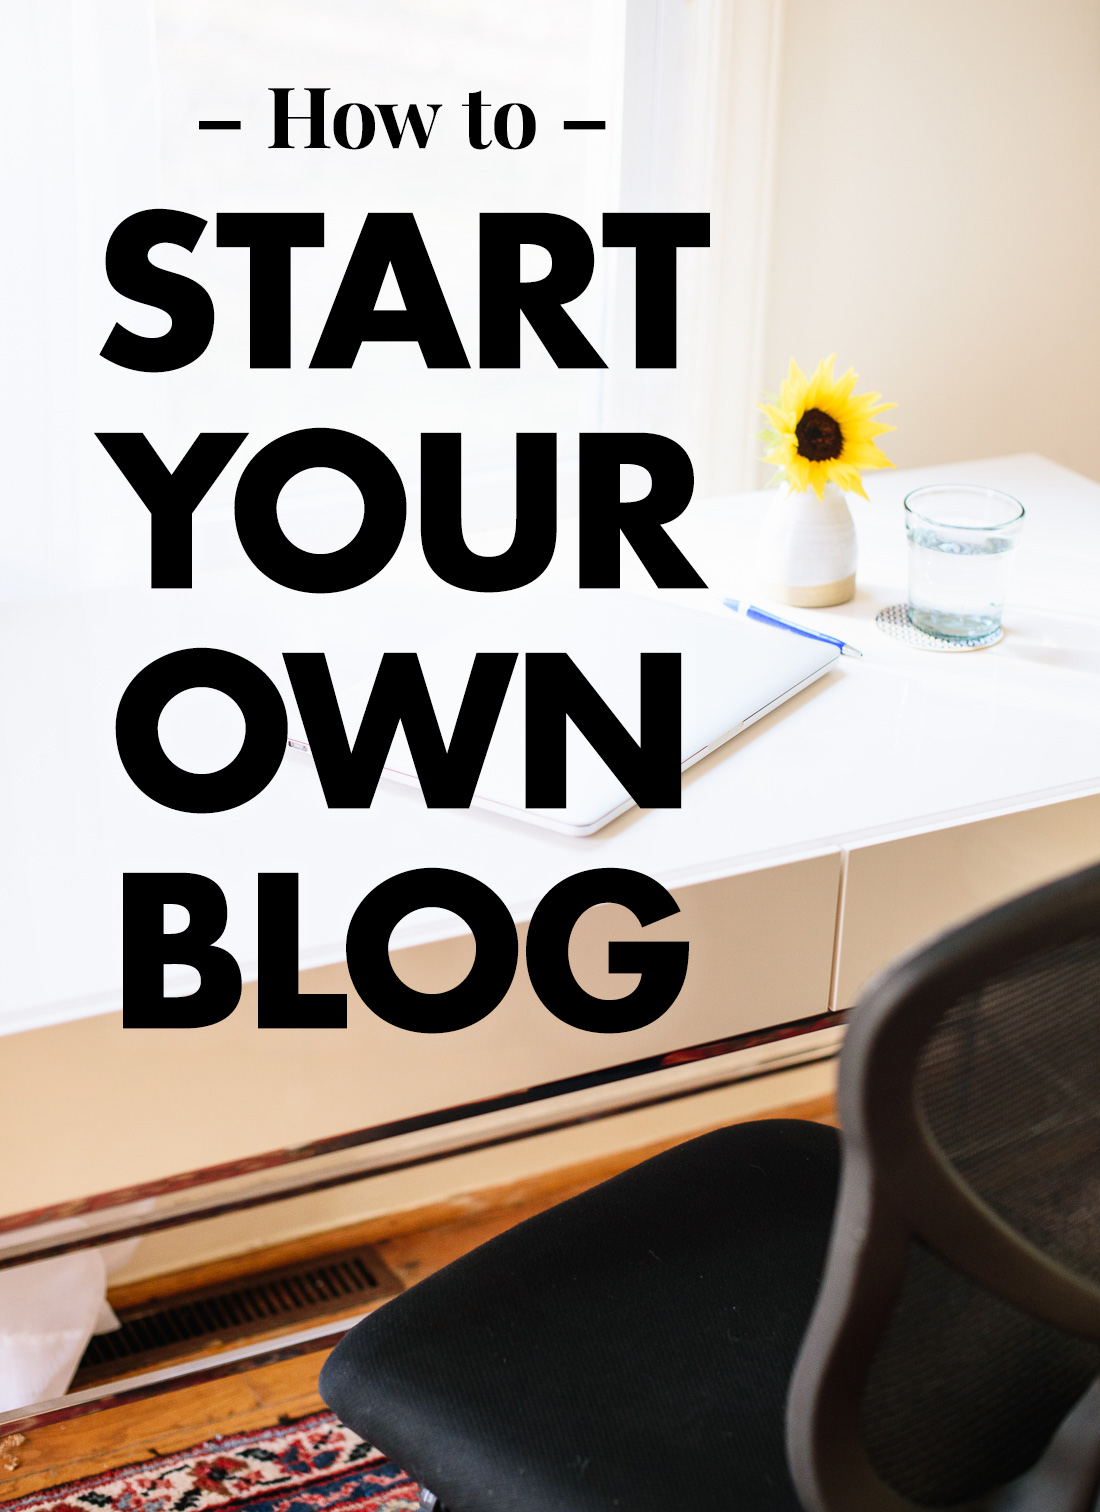 How to set up your own blog or website,  introduction